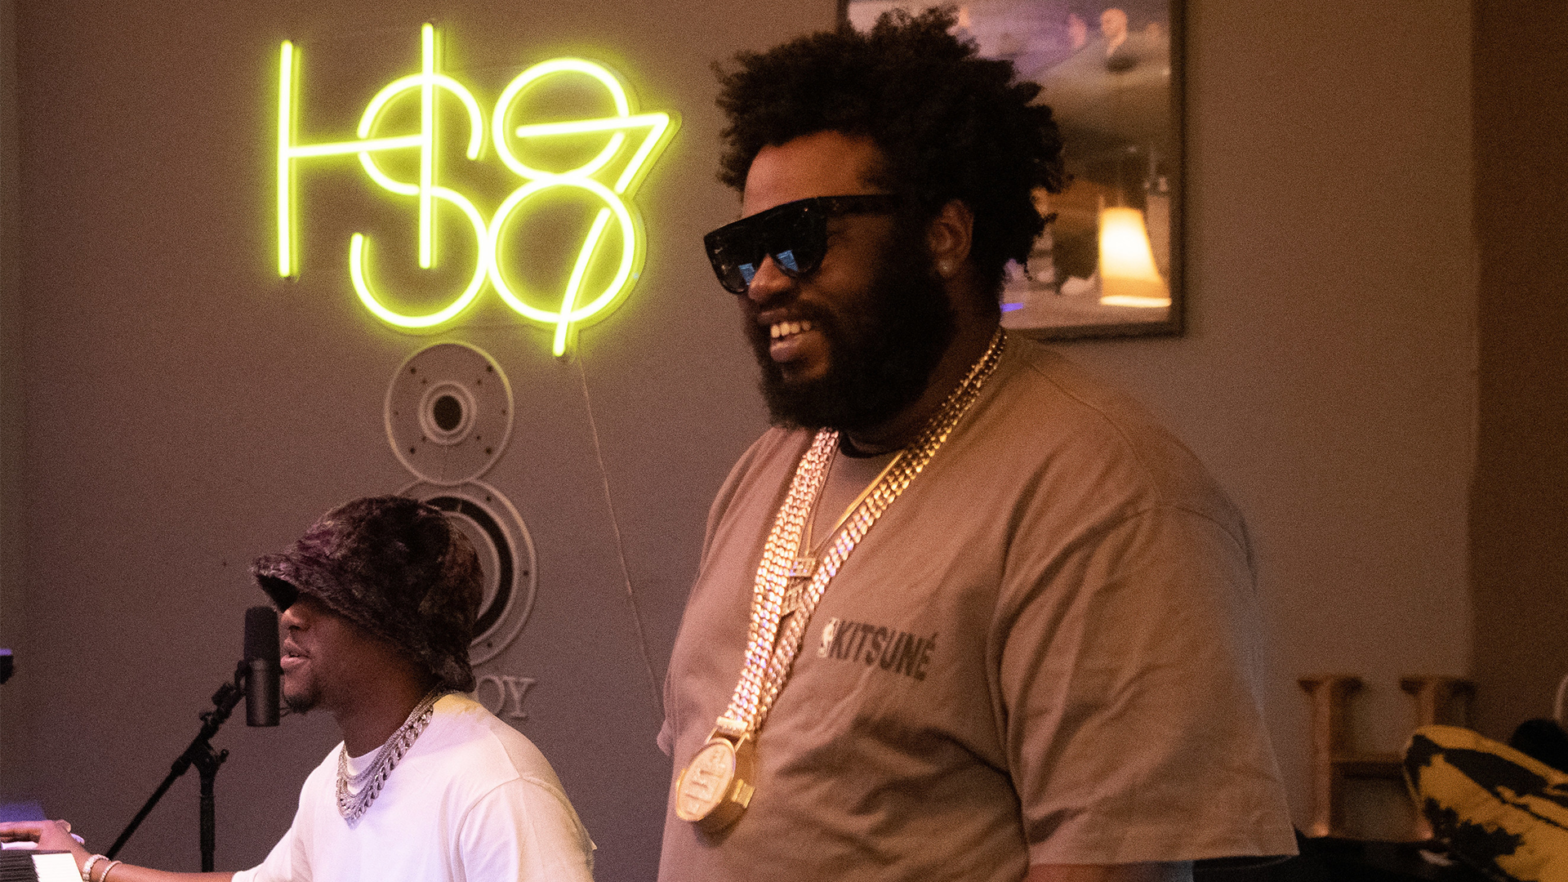 Hit-Boy, James Fauntleroy Tapped To Produce Album For Bored Ape Yacht Club's Rock Band